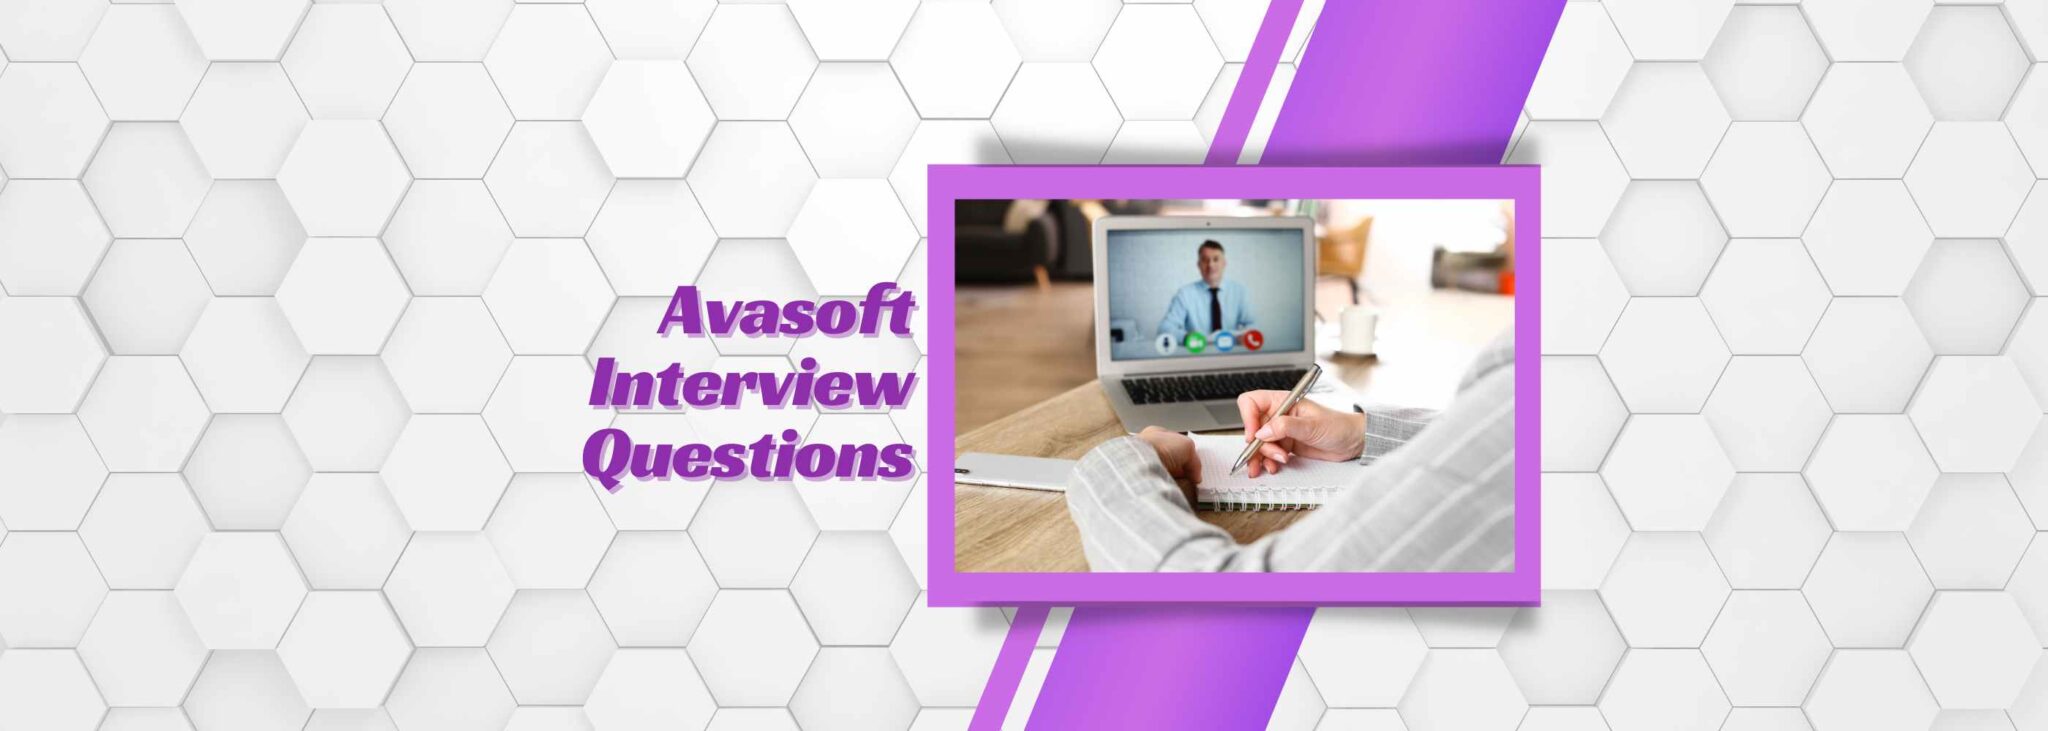 Avasoft Interview Questions 2048x731 